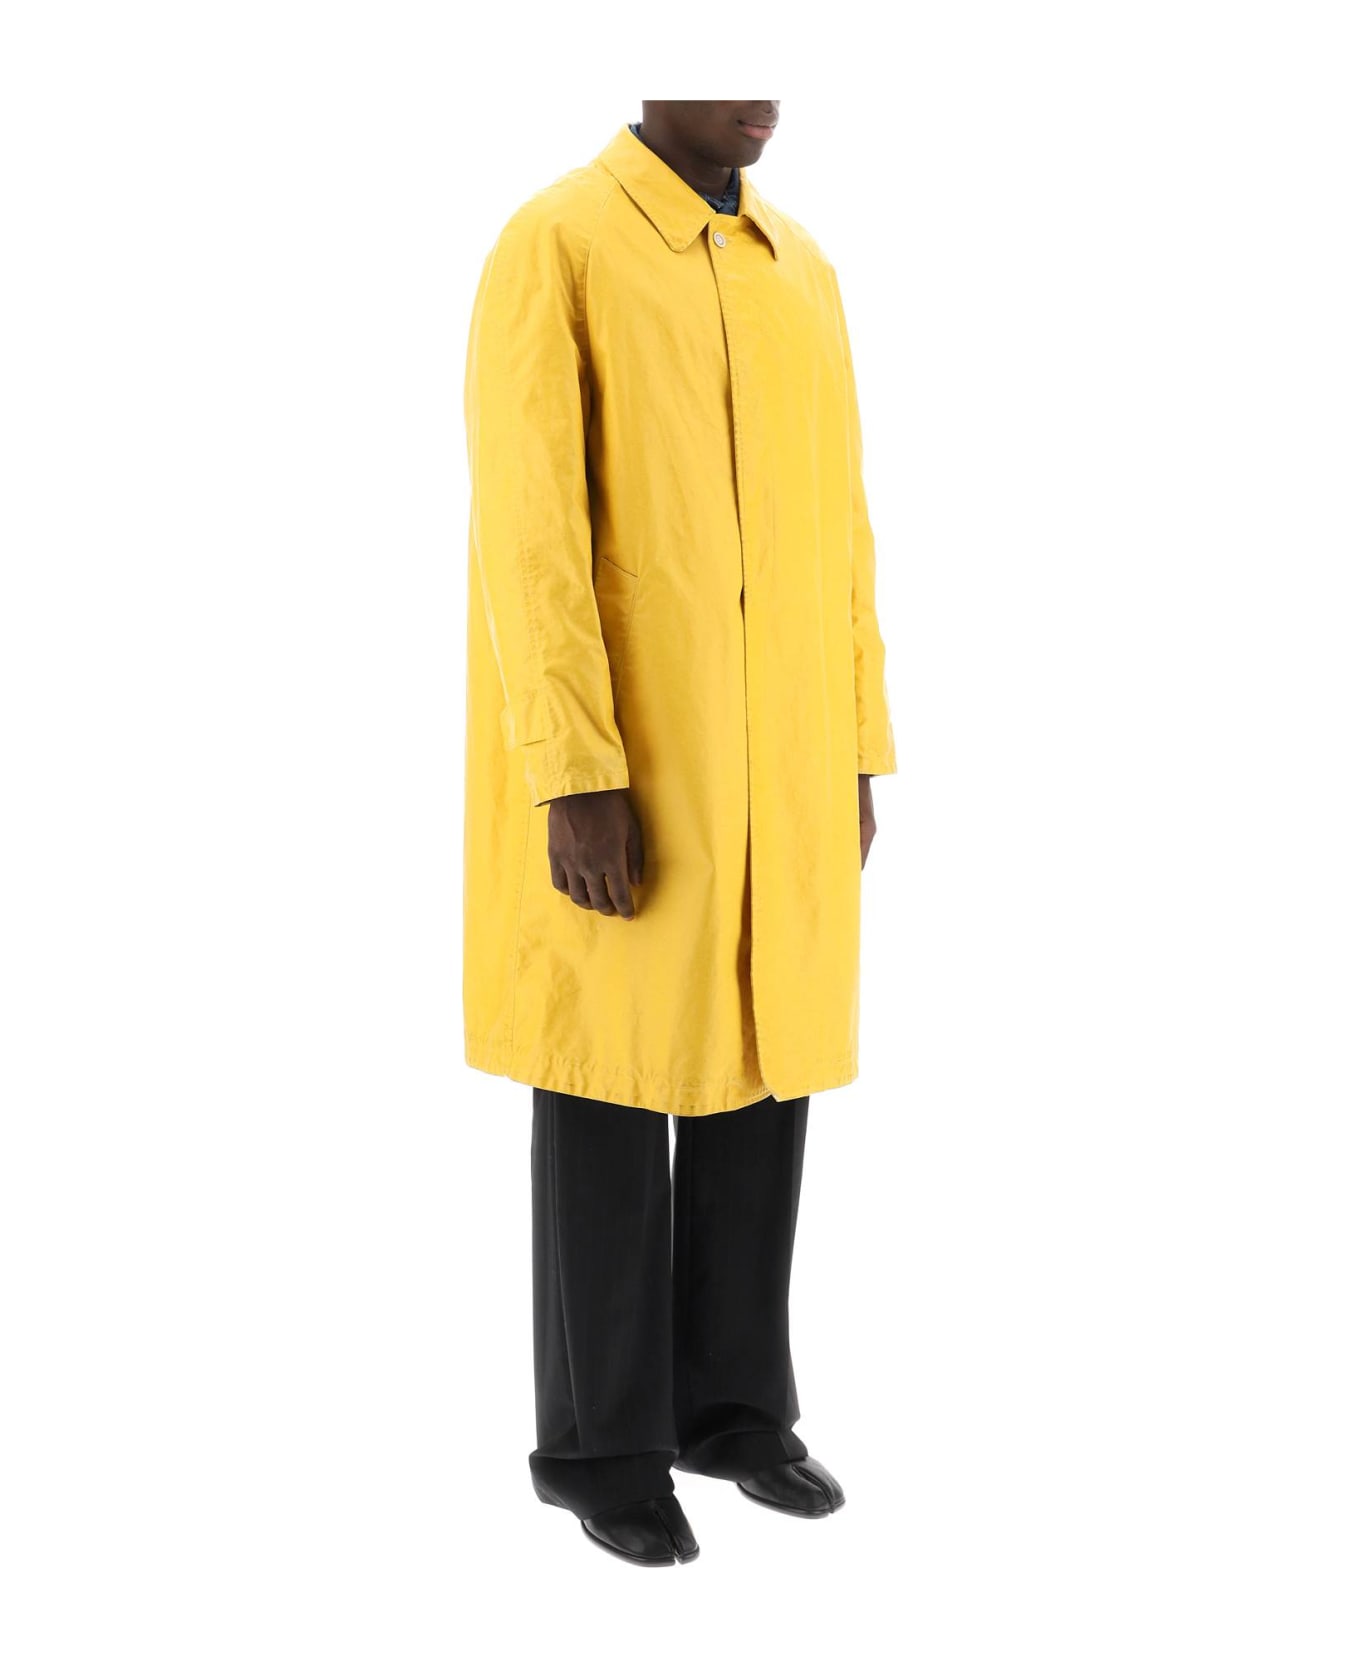 Maison Margiela Trench Coat In Worn-out Effect Coated Cotton - YELLOW (Yellow)